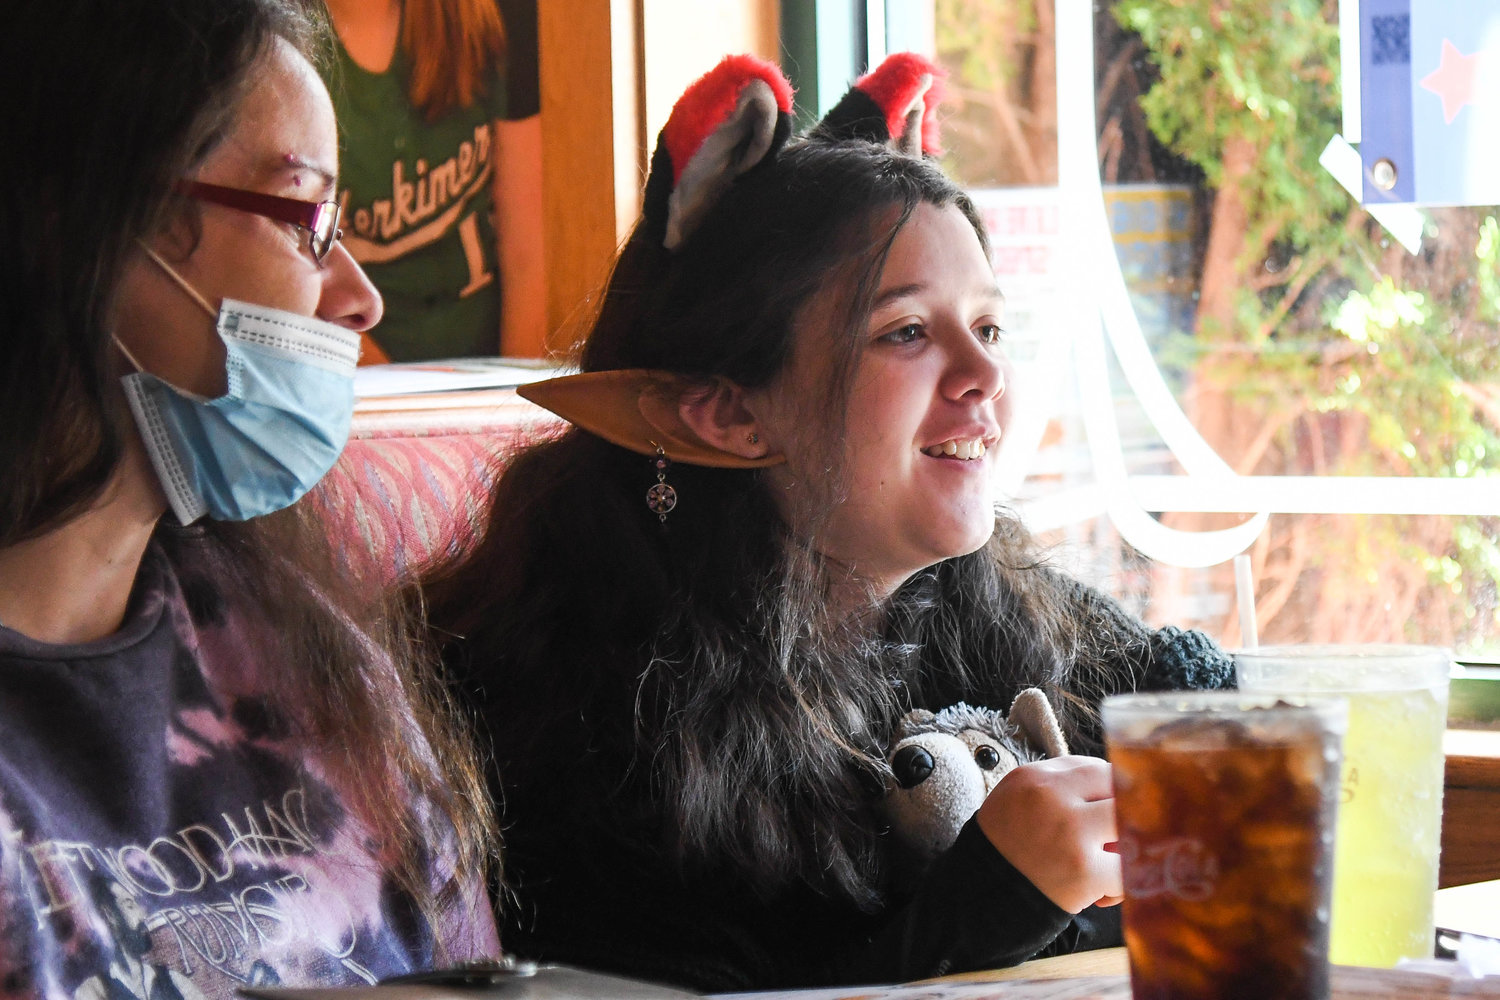 Twelve-year-old Serenity from Dolgeville holds a wolf stuffed animal and wears ears while receiving a wish from Make-A-Wish Central New York and Excellus BlueCross BlueShield on Wednesday at Applebee’s in Herkimer. Her favorite animals are wolves and her wish will allow her to go camping with them in a safe environment at a wolf conservation center in South Salem, Massachusetts.